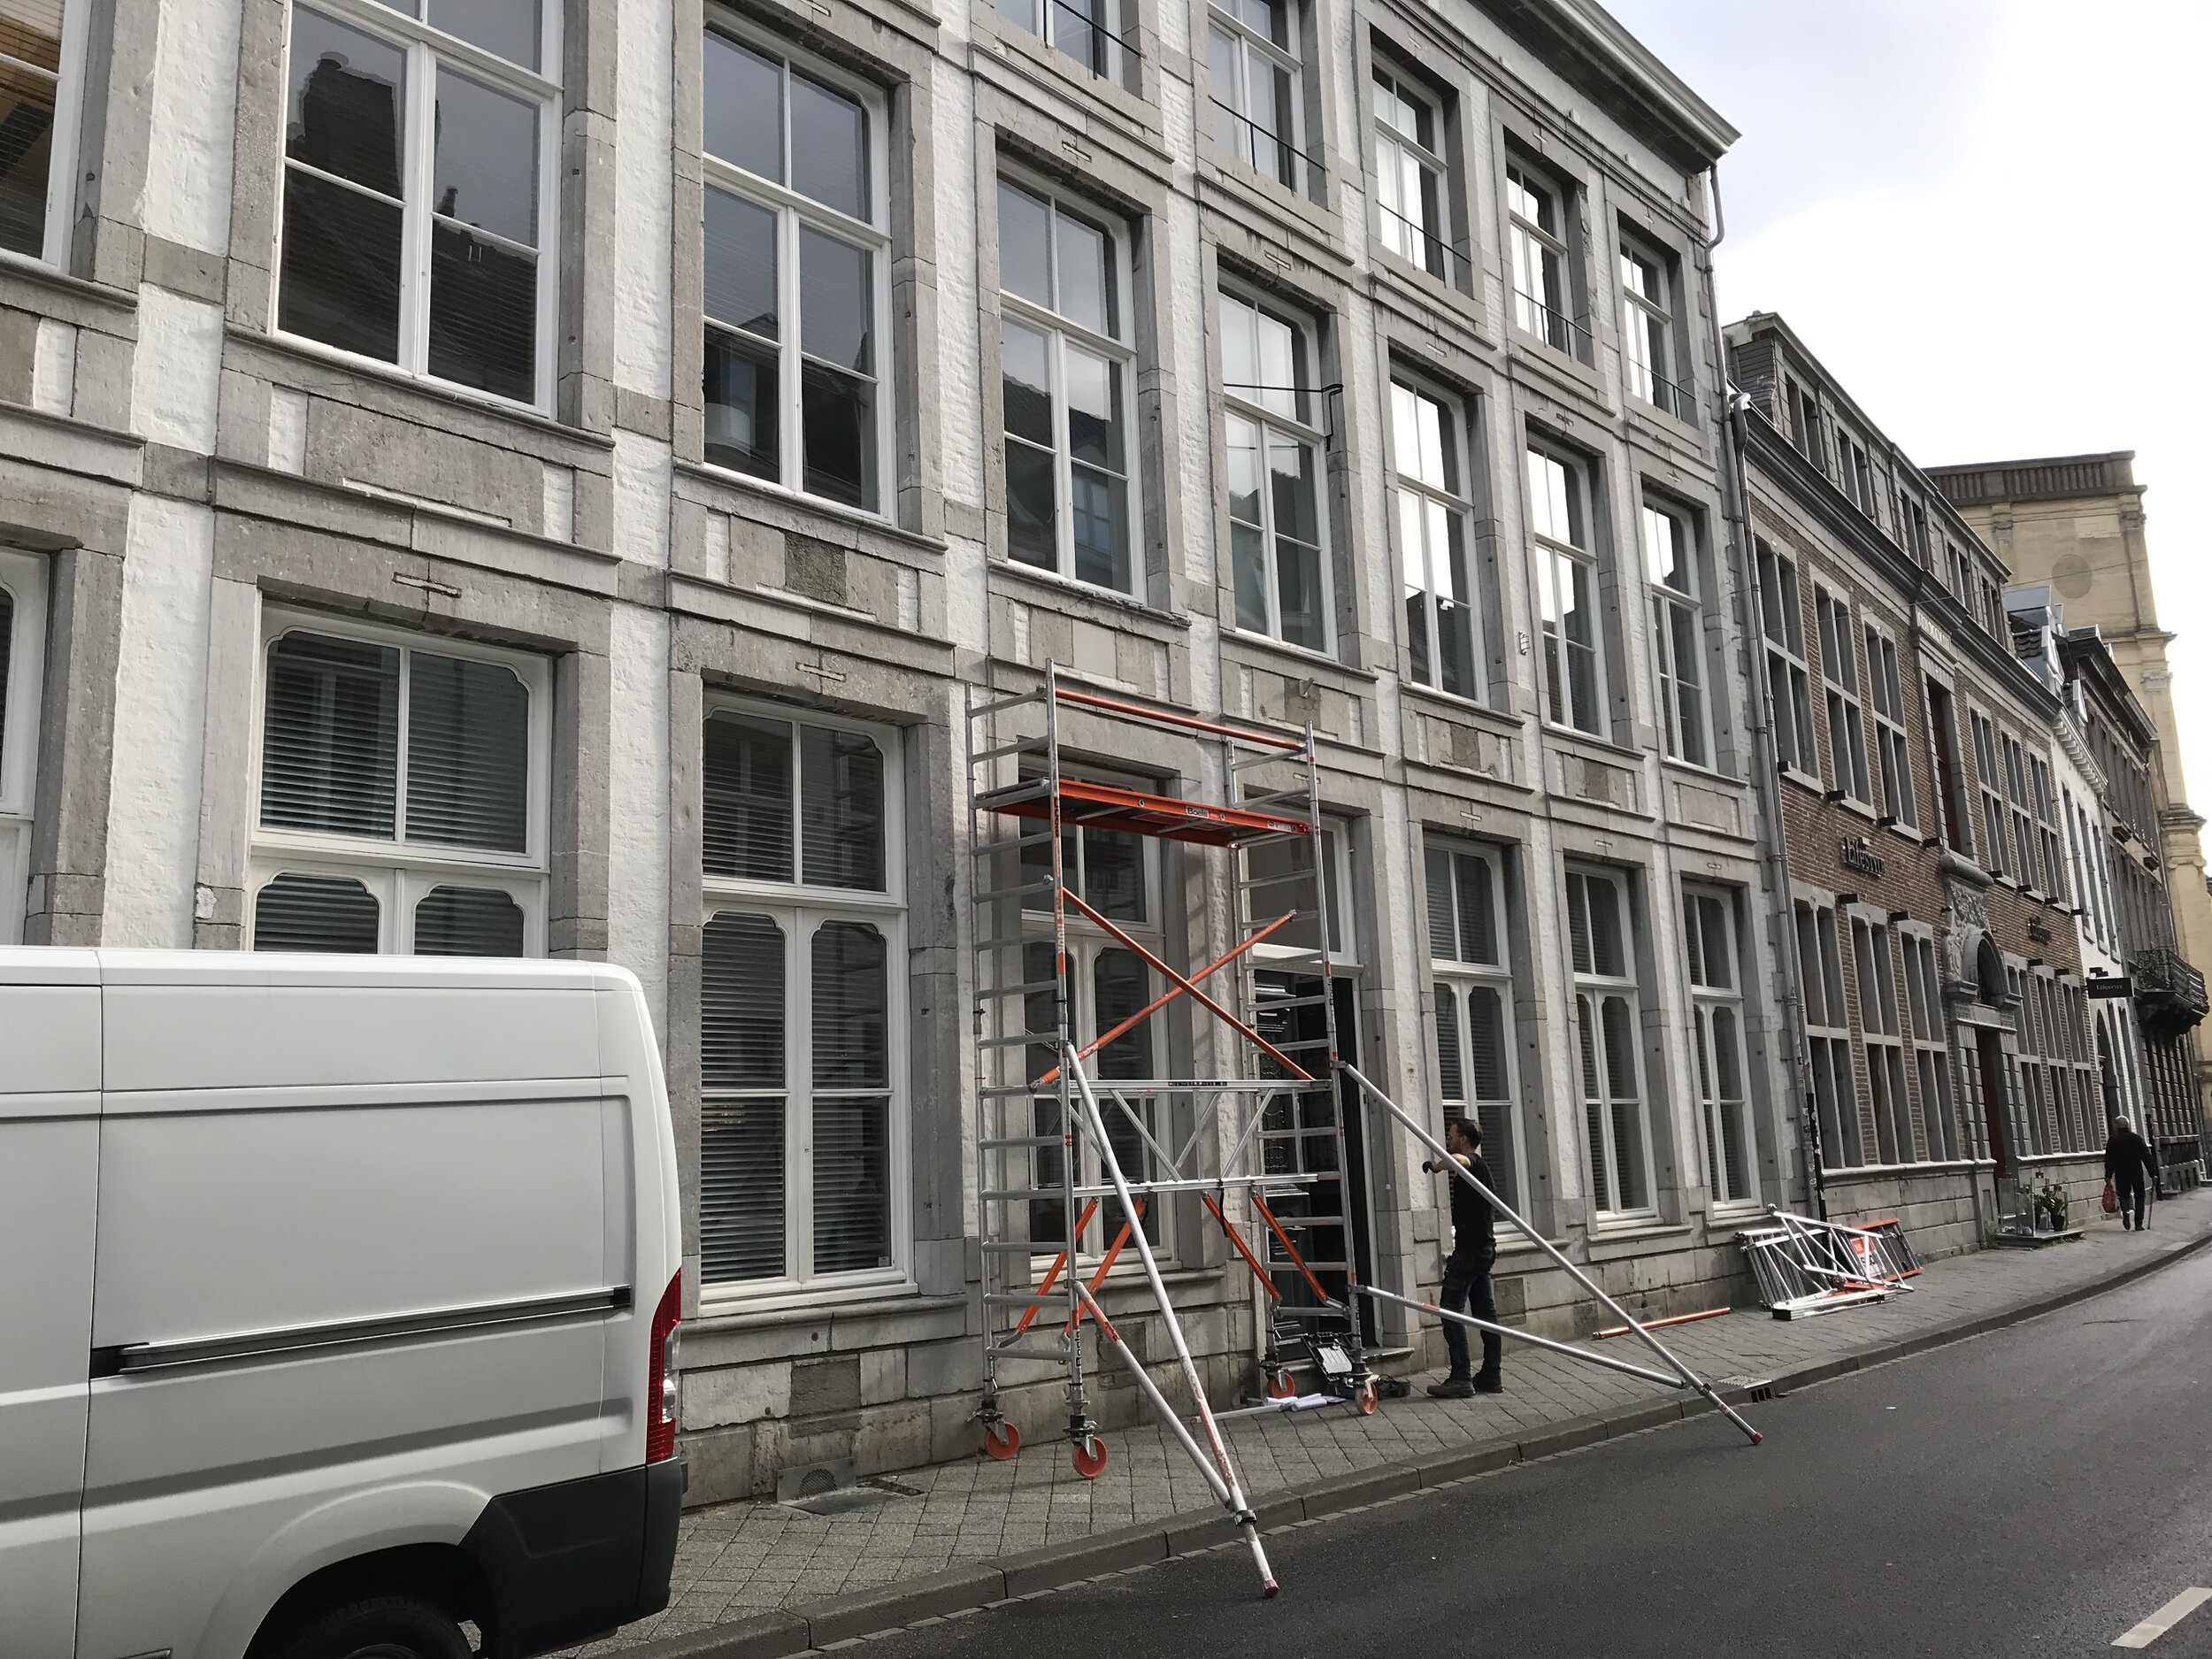   Adelmeijer Hoyng Lawyers    Precision job for facade signage  